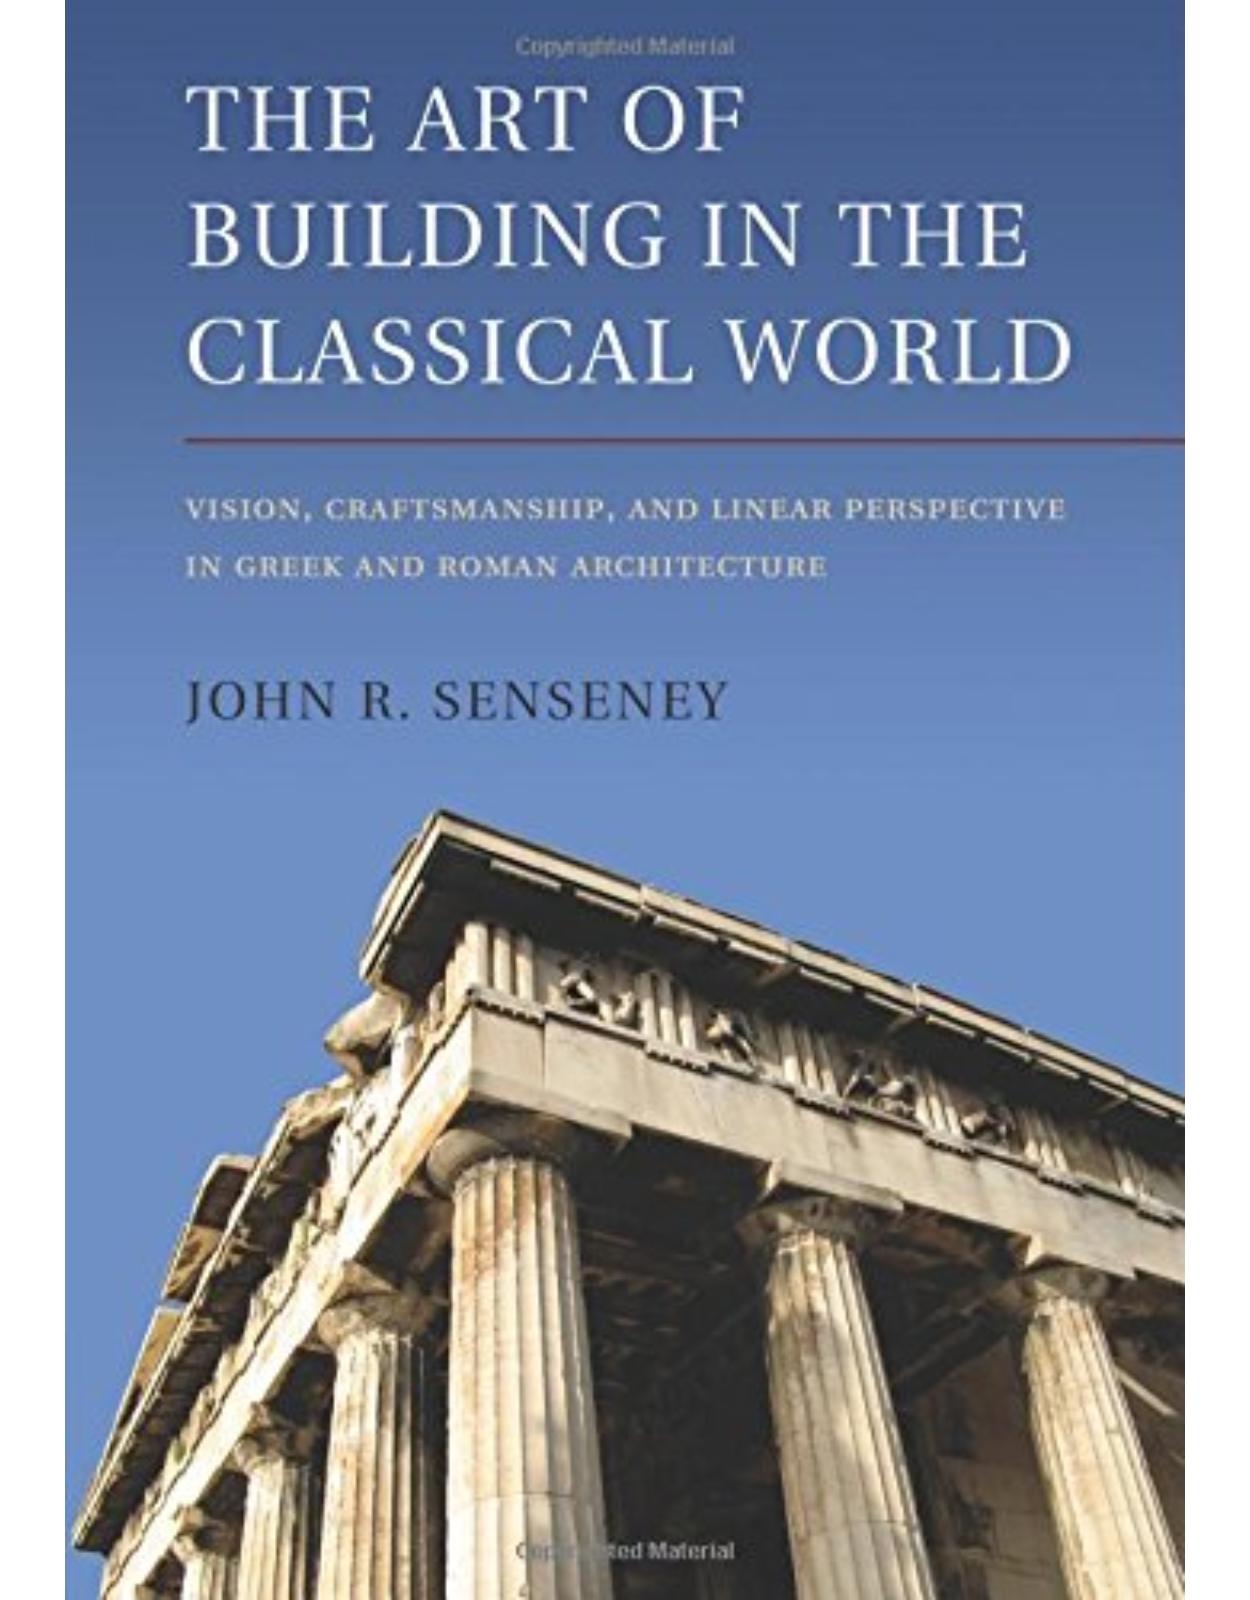 The Art of Building in the Classical World: Vision, Craftsmanship, and Linear Perspective in Greek and Roman Architecture